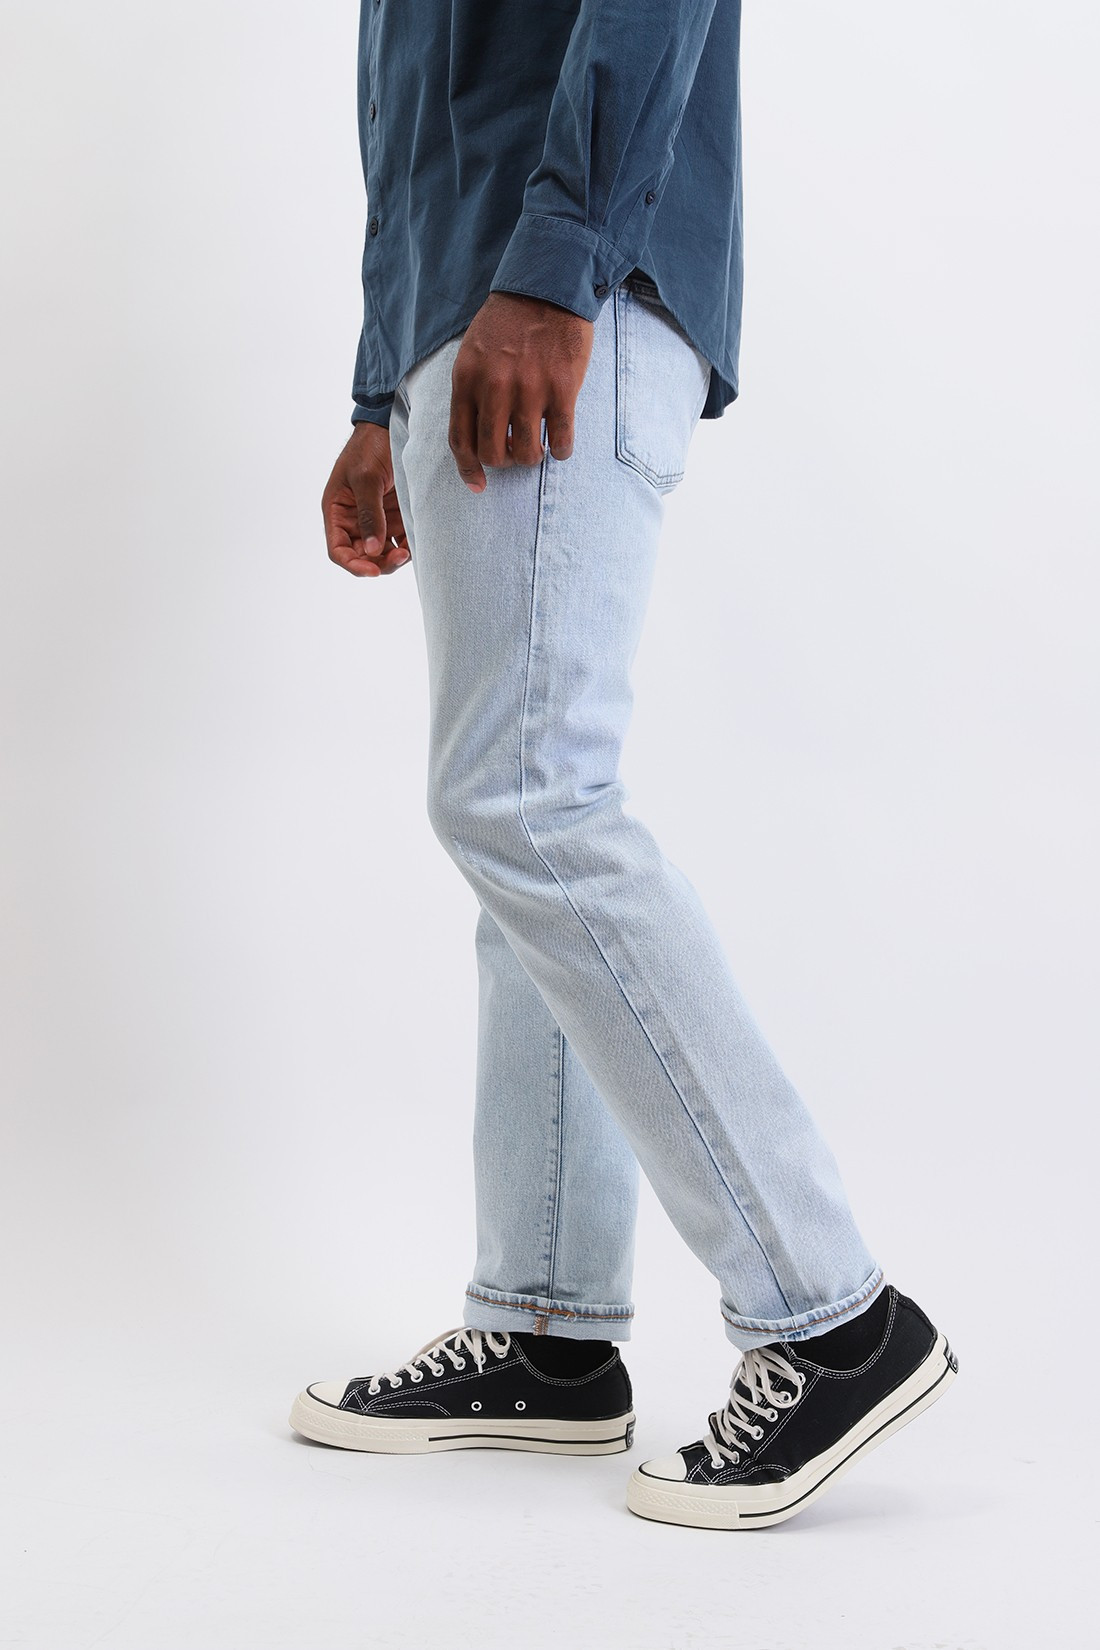 LEVI'S ® MADE AND CRAFTED / Lmc 511 lmc Indigo frost